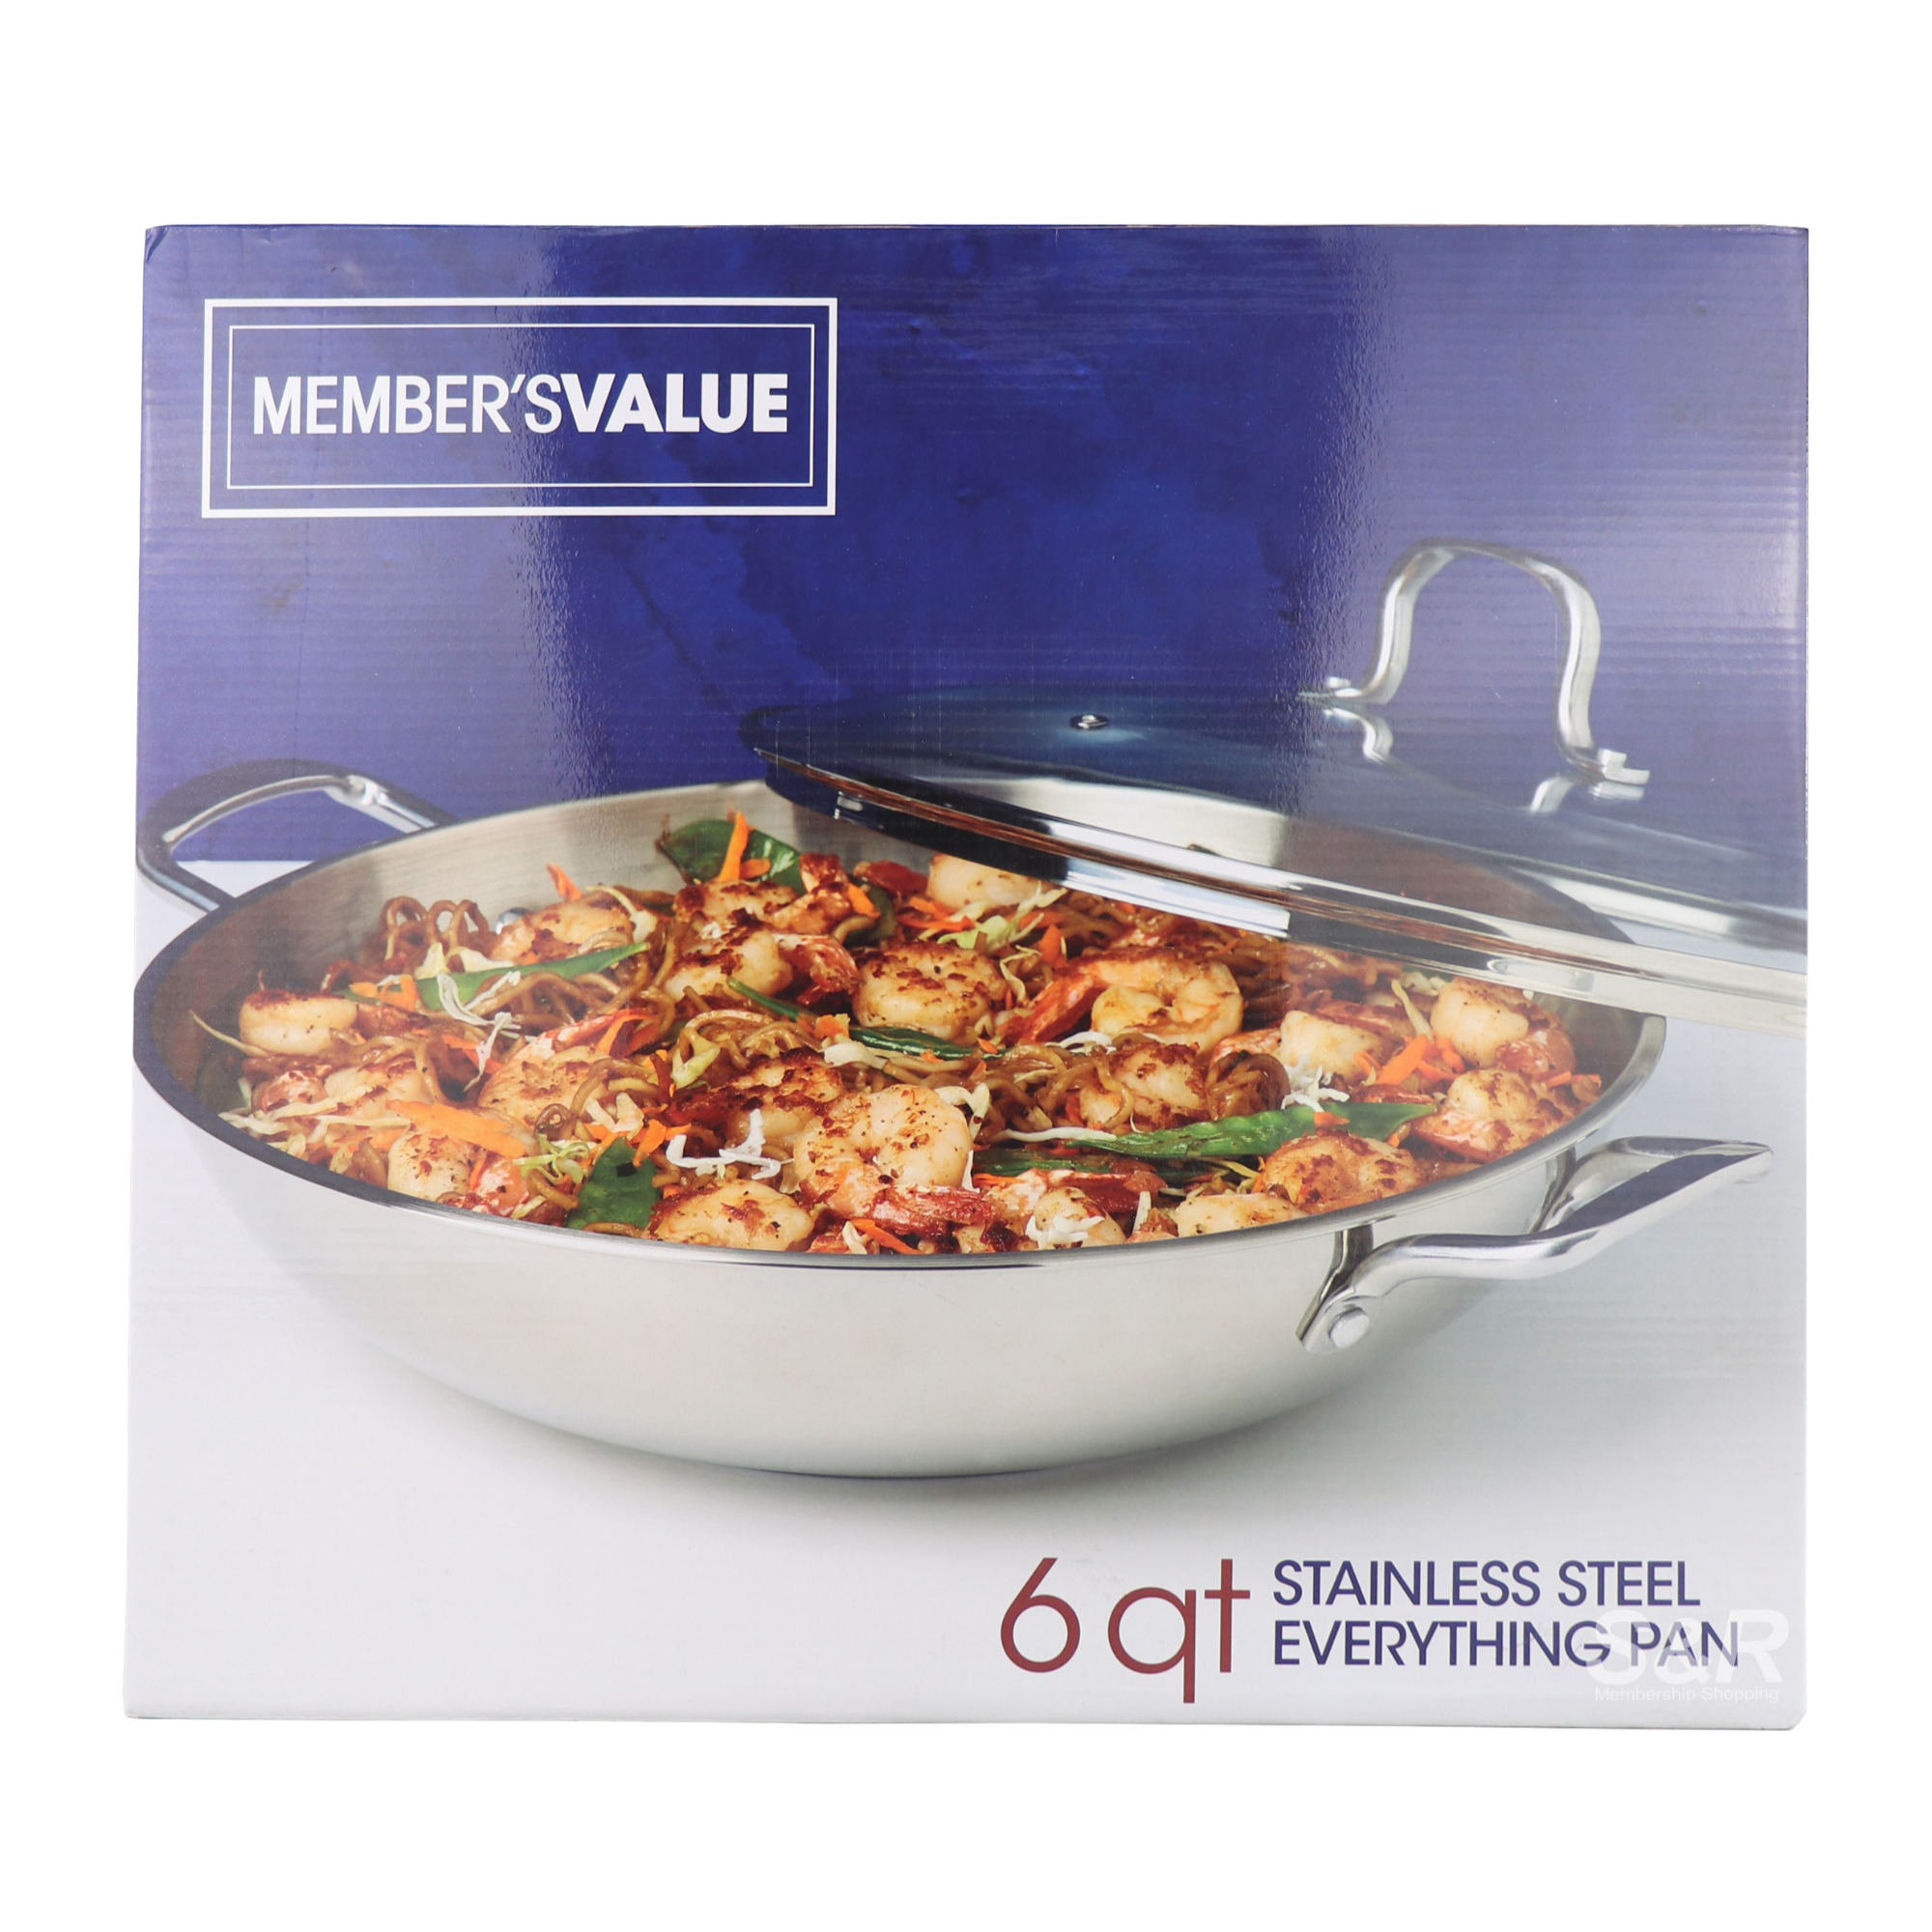 Member's Value 6Qt Stainless Steel Everything Pan 2pcs